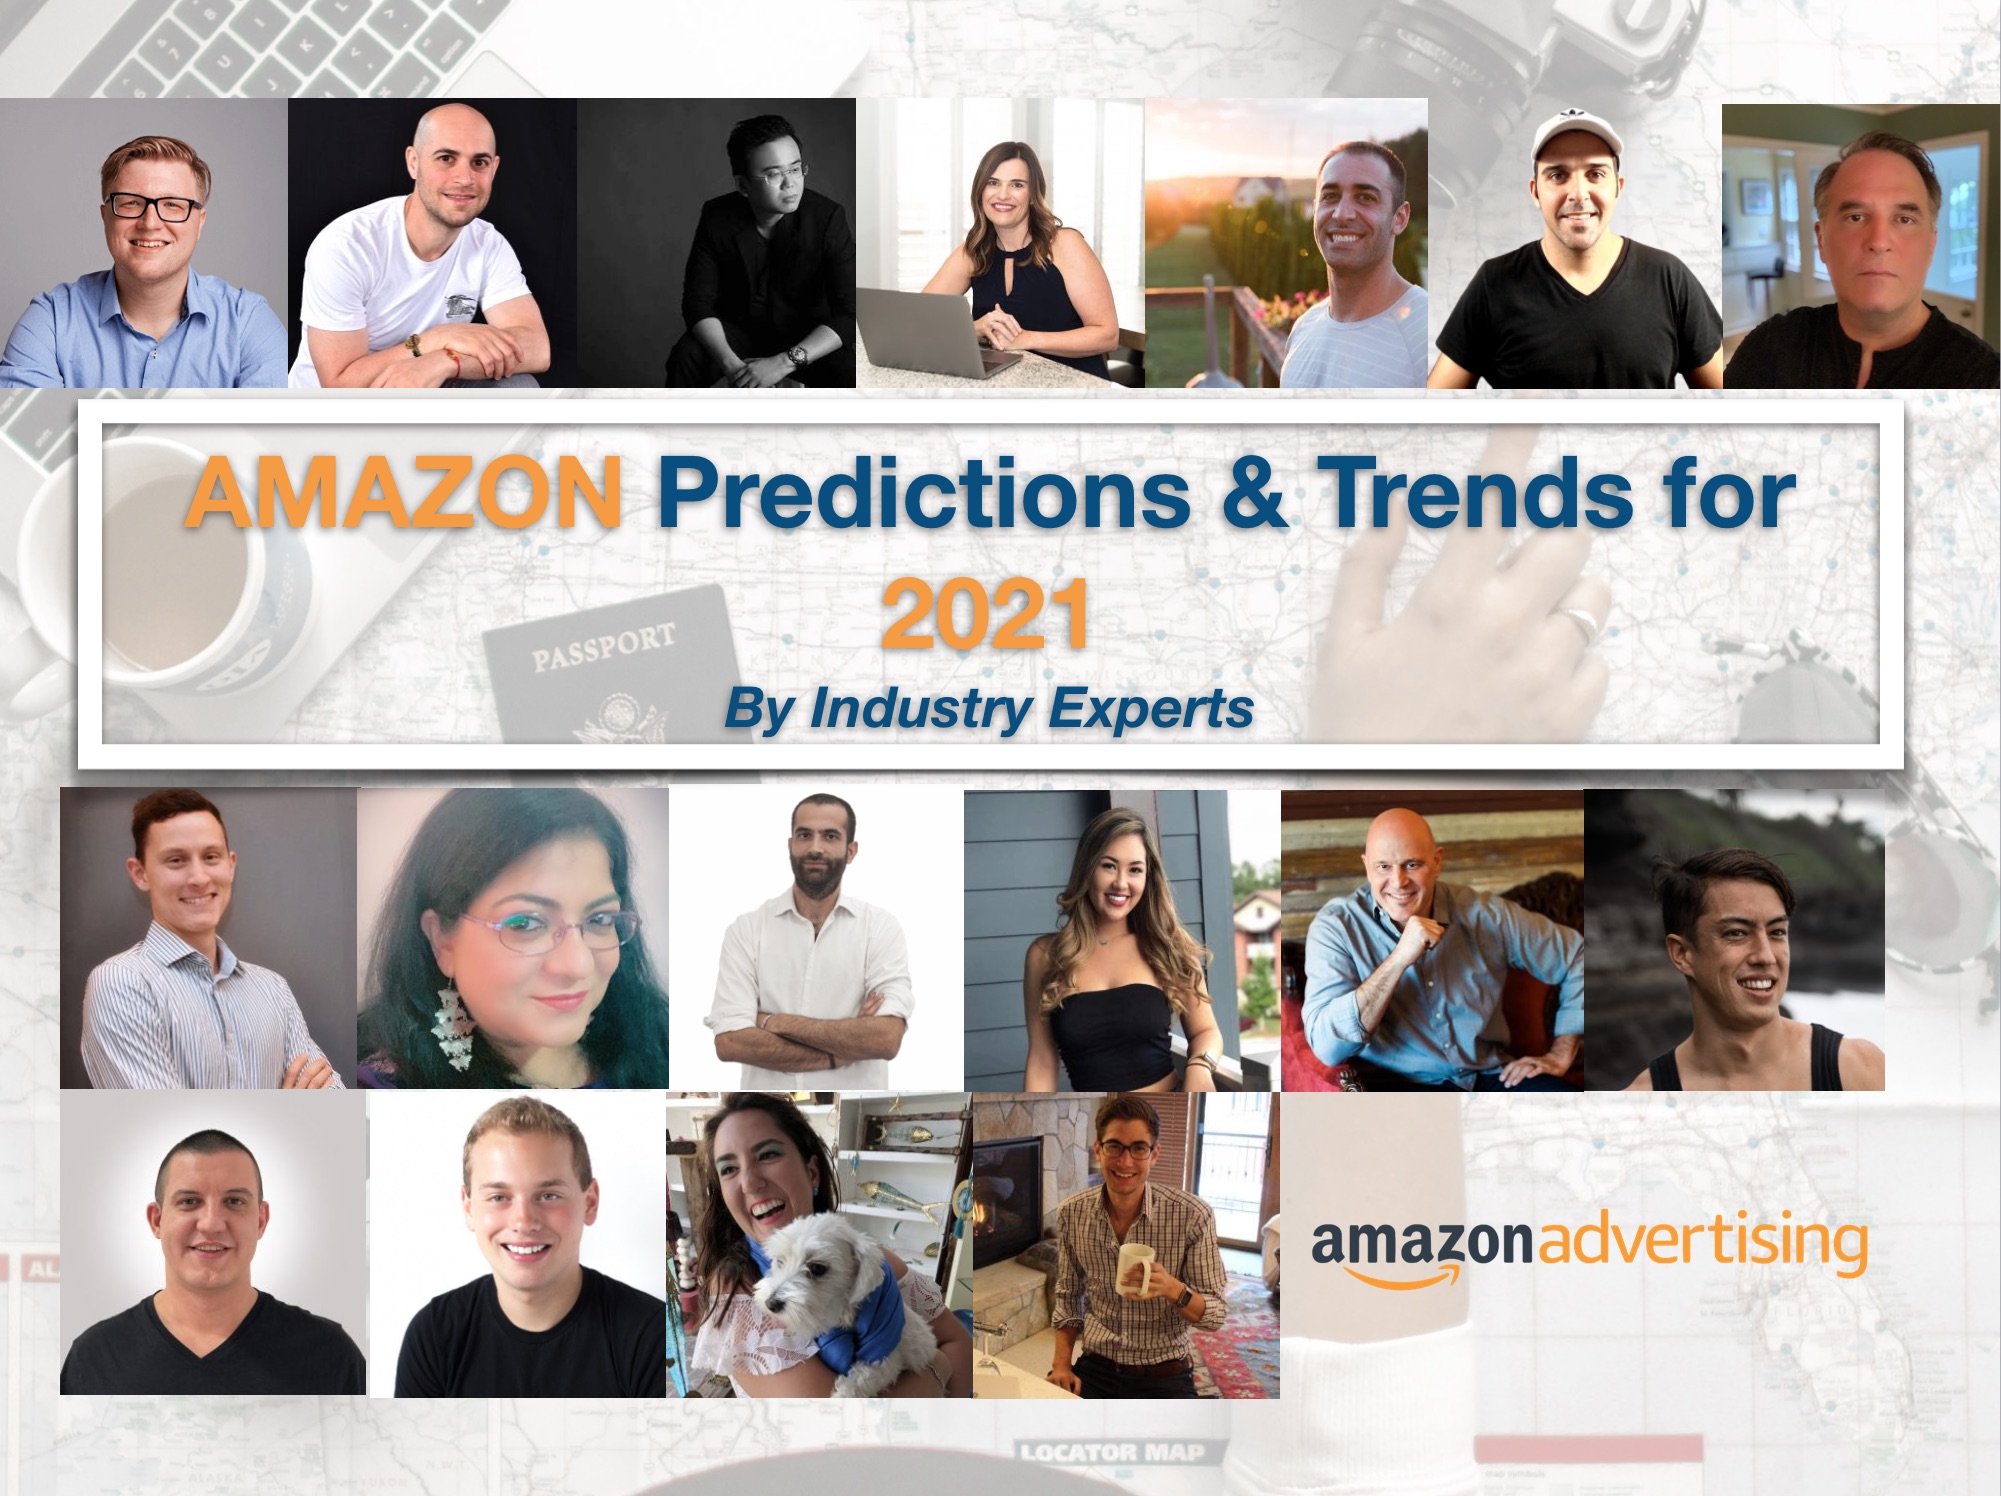 Amazon Trends and Predictions for 2021 by Industry Experts